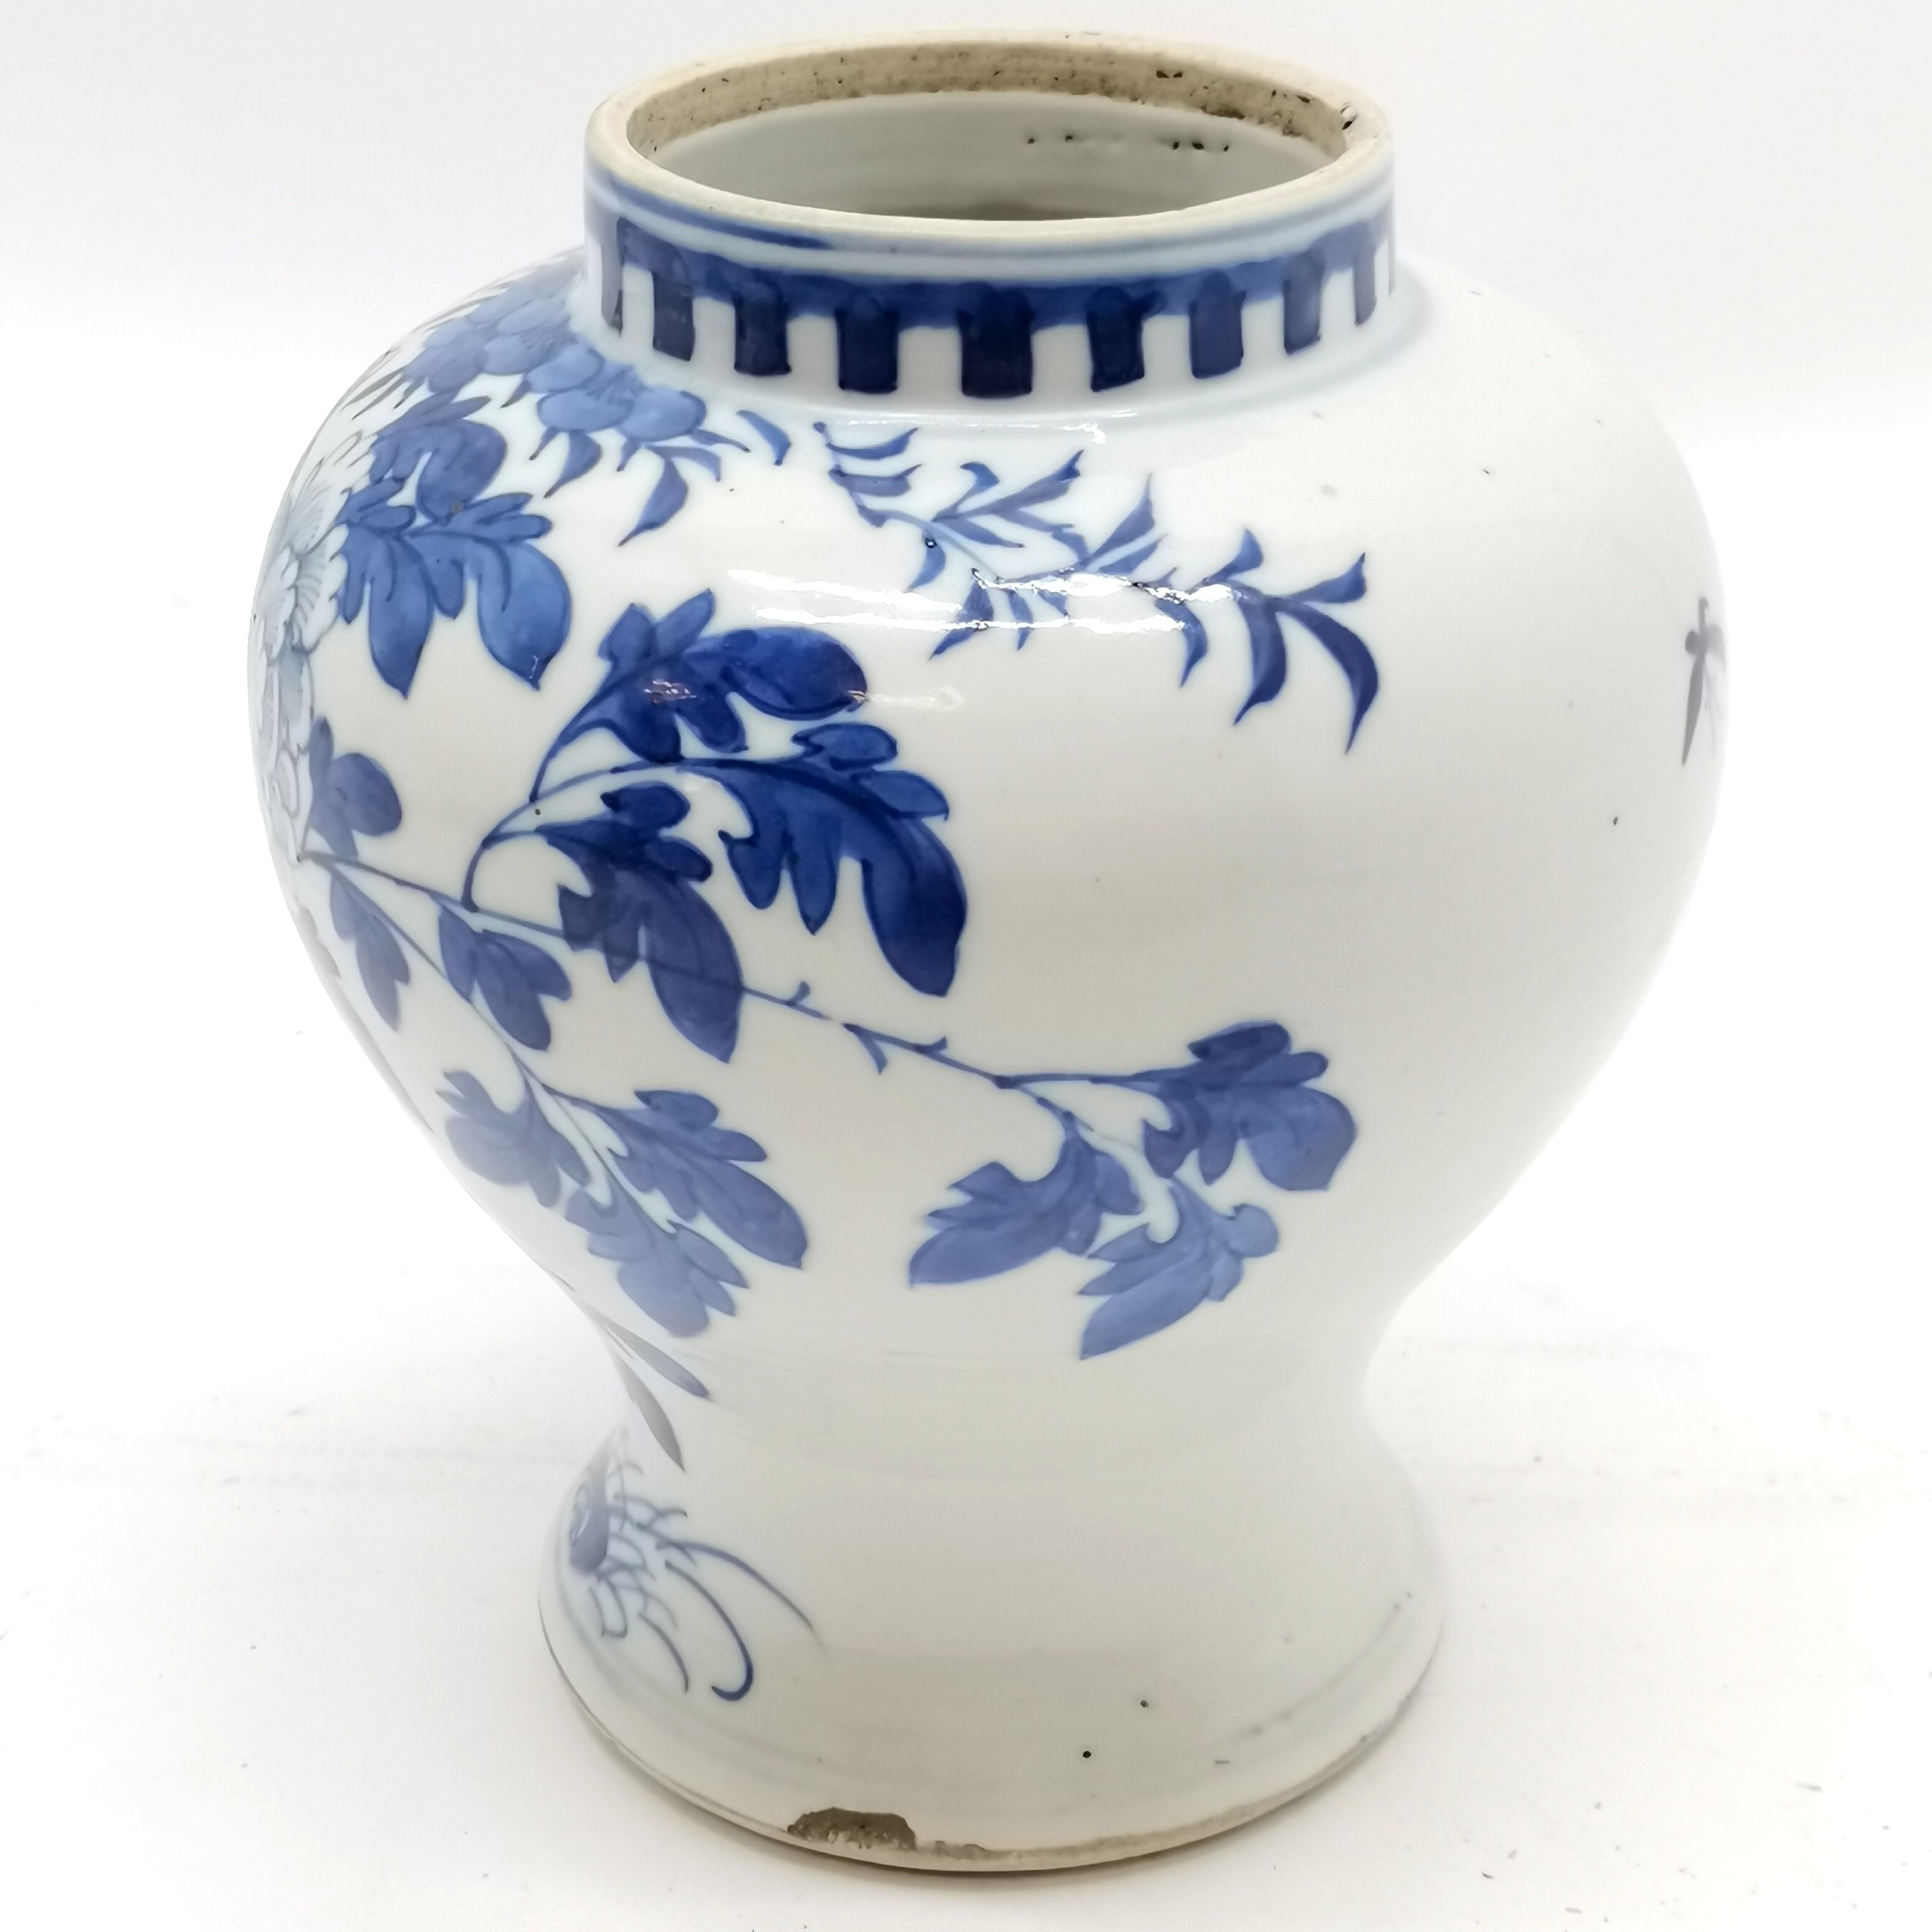 Antique Chinese blue & white decorated pot with bird / flower detail (16cm high) - has chip to rim & - Image 3 of 6